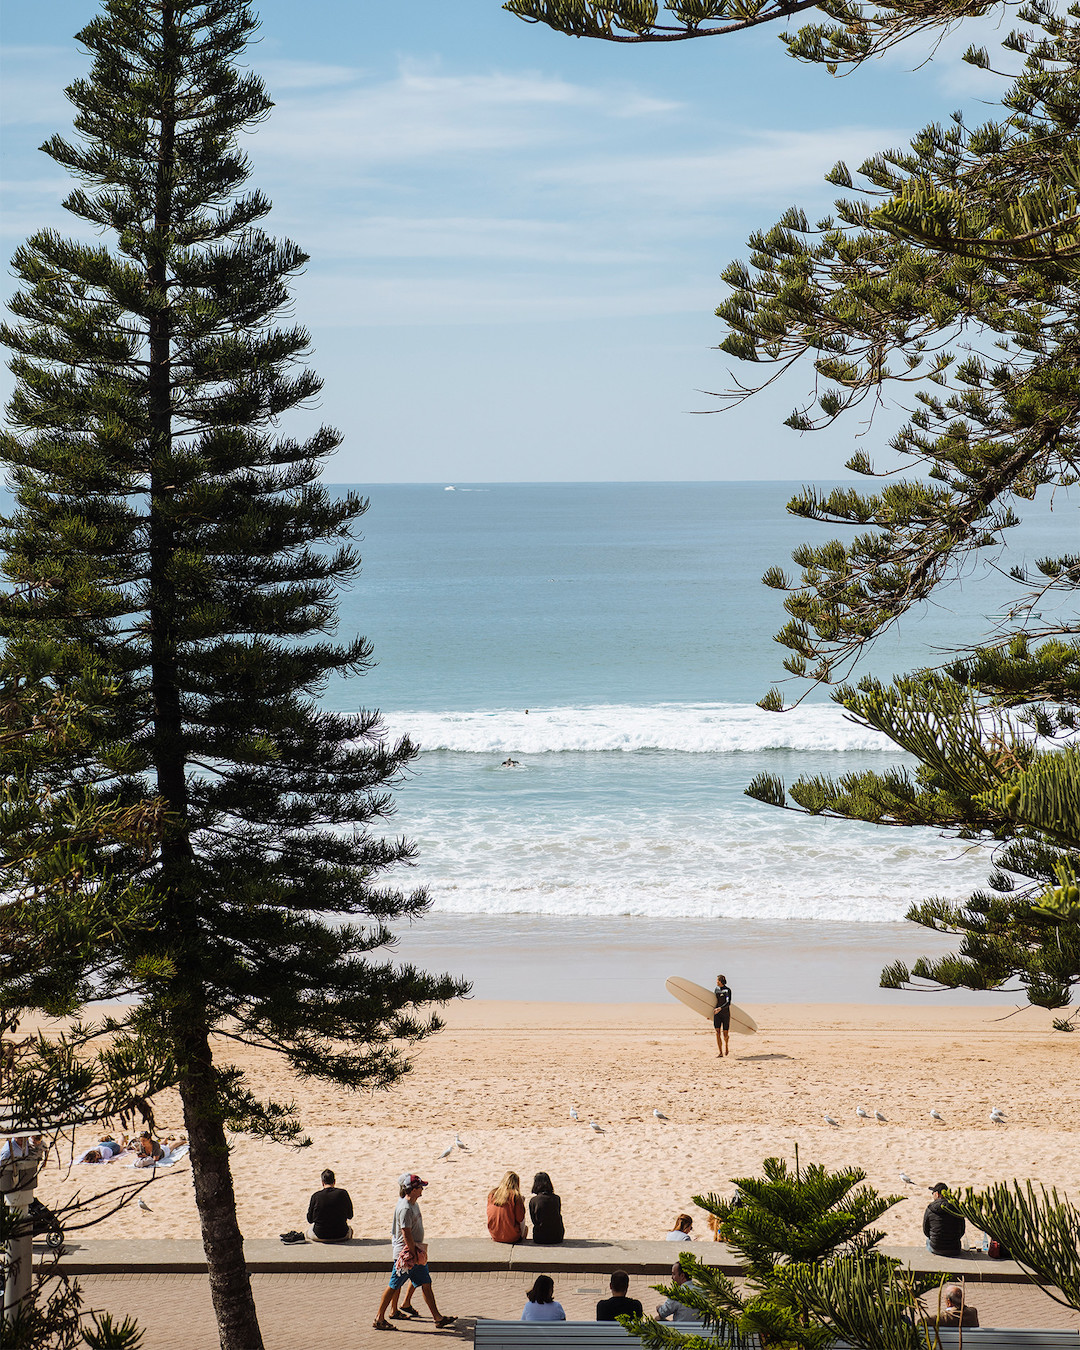 https://imgix.theurbanlist.com/content/article/best_beaches_sydney_nsw_manly_beach.jpg